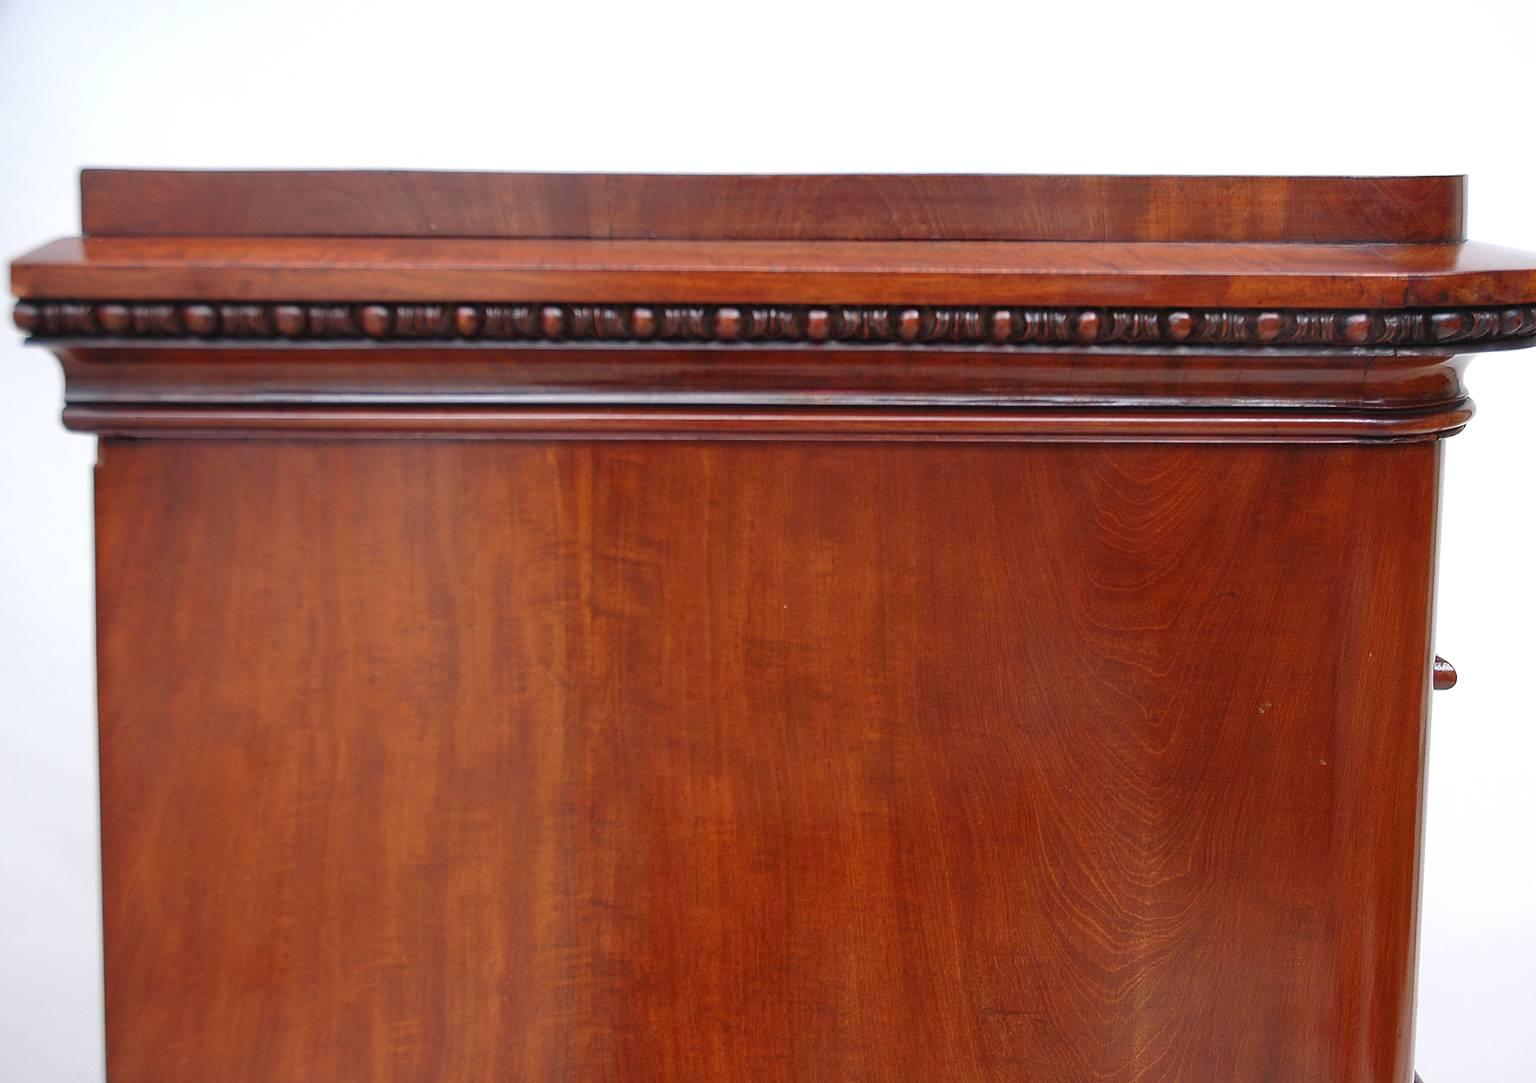 Polished Antique Biedermeier Tall Chest of Drawers in Bookmatched Mahogany, Denmark, 1840